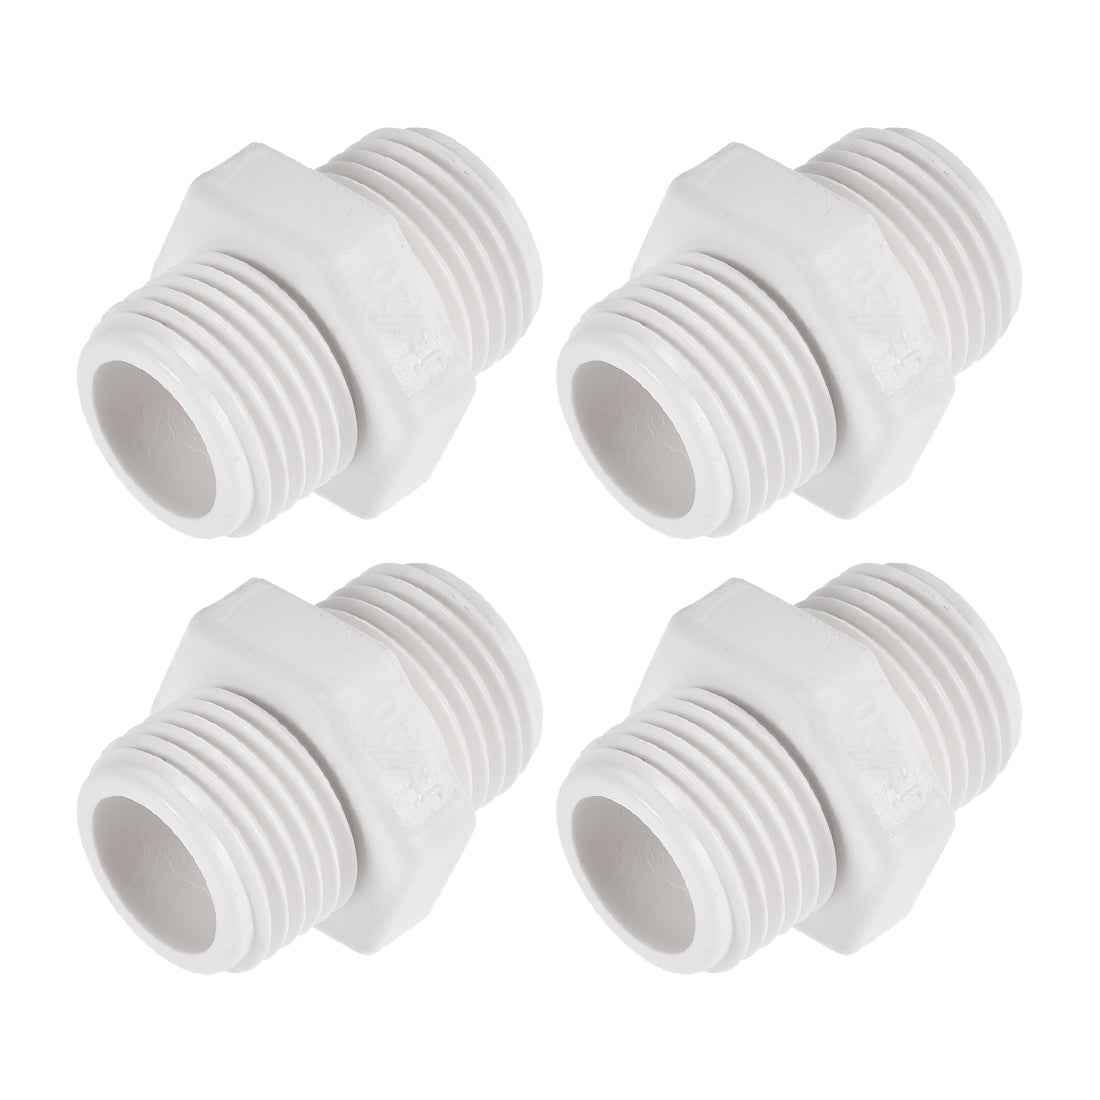 Uxcell Uxcell Pipe Fitting, G2 Male Thread, Hex Nipple Tube Adaptor Hose Connector, for Water Tanks, PVC, White, Pack of 4